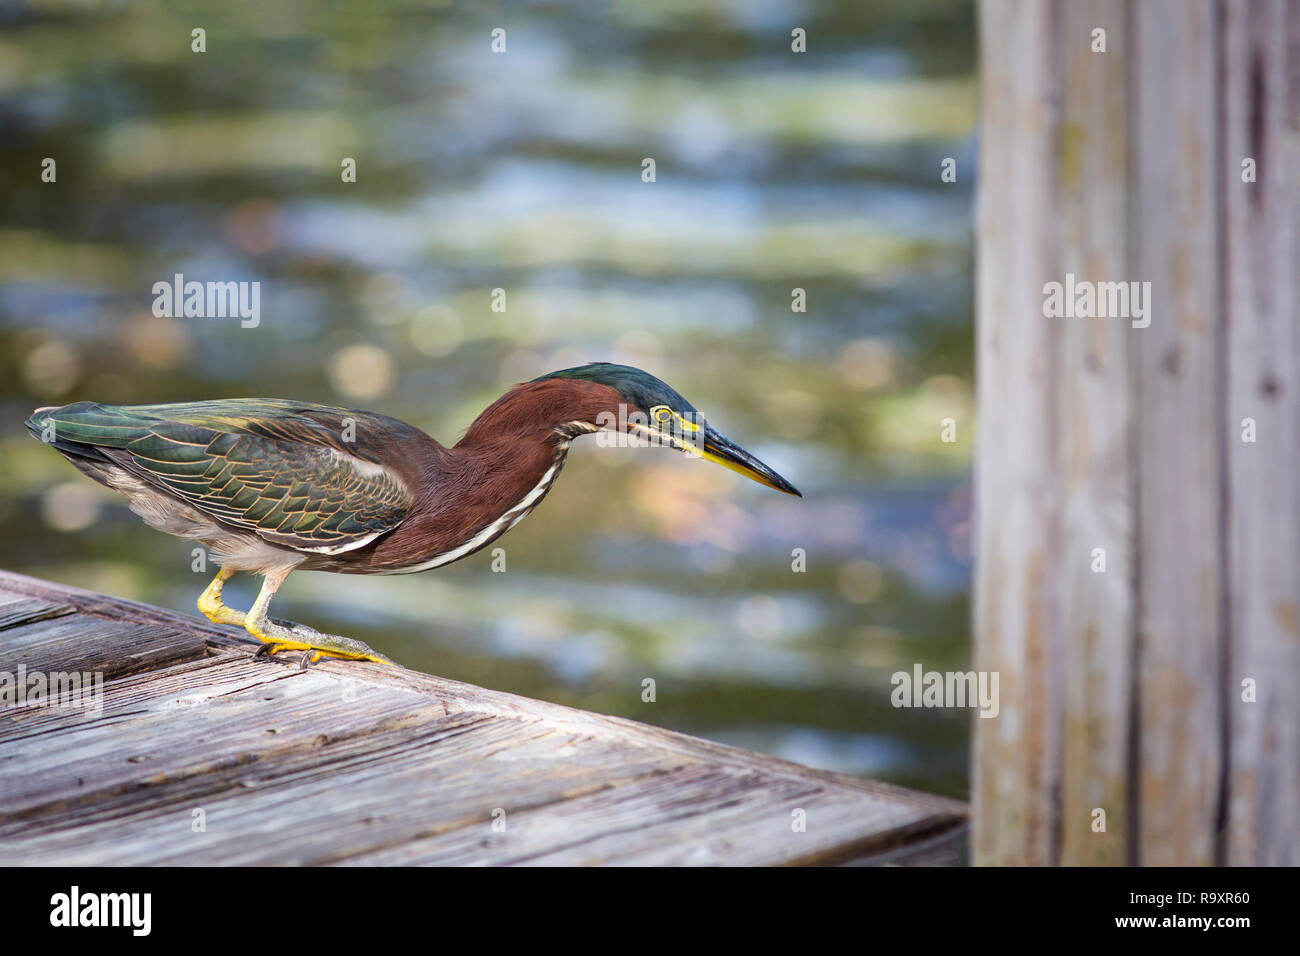 Green Heron (Butorides virescens) at a boat dock poised to dive for the fish below, its iridescence matching the sparkly colors of the water Stock Photo